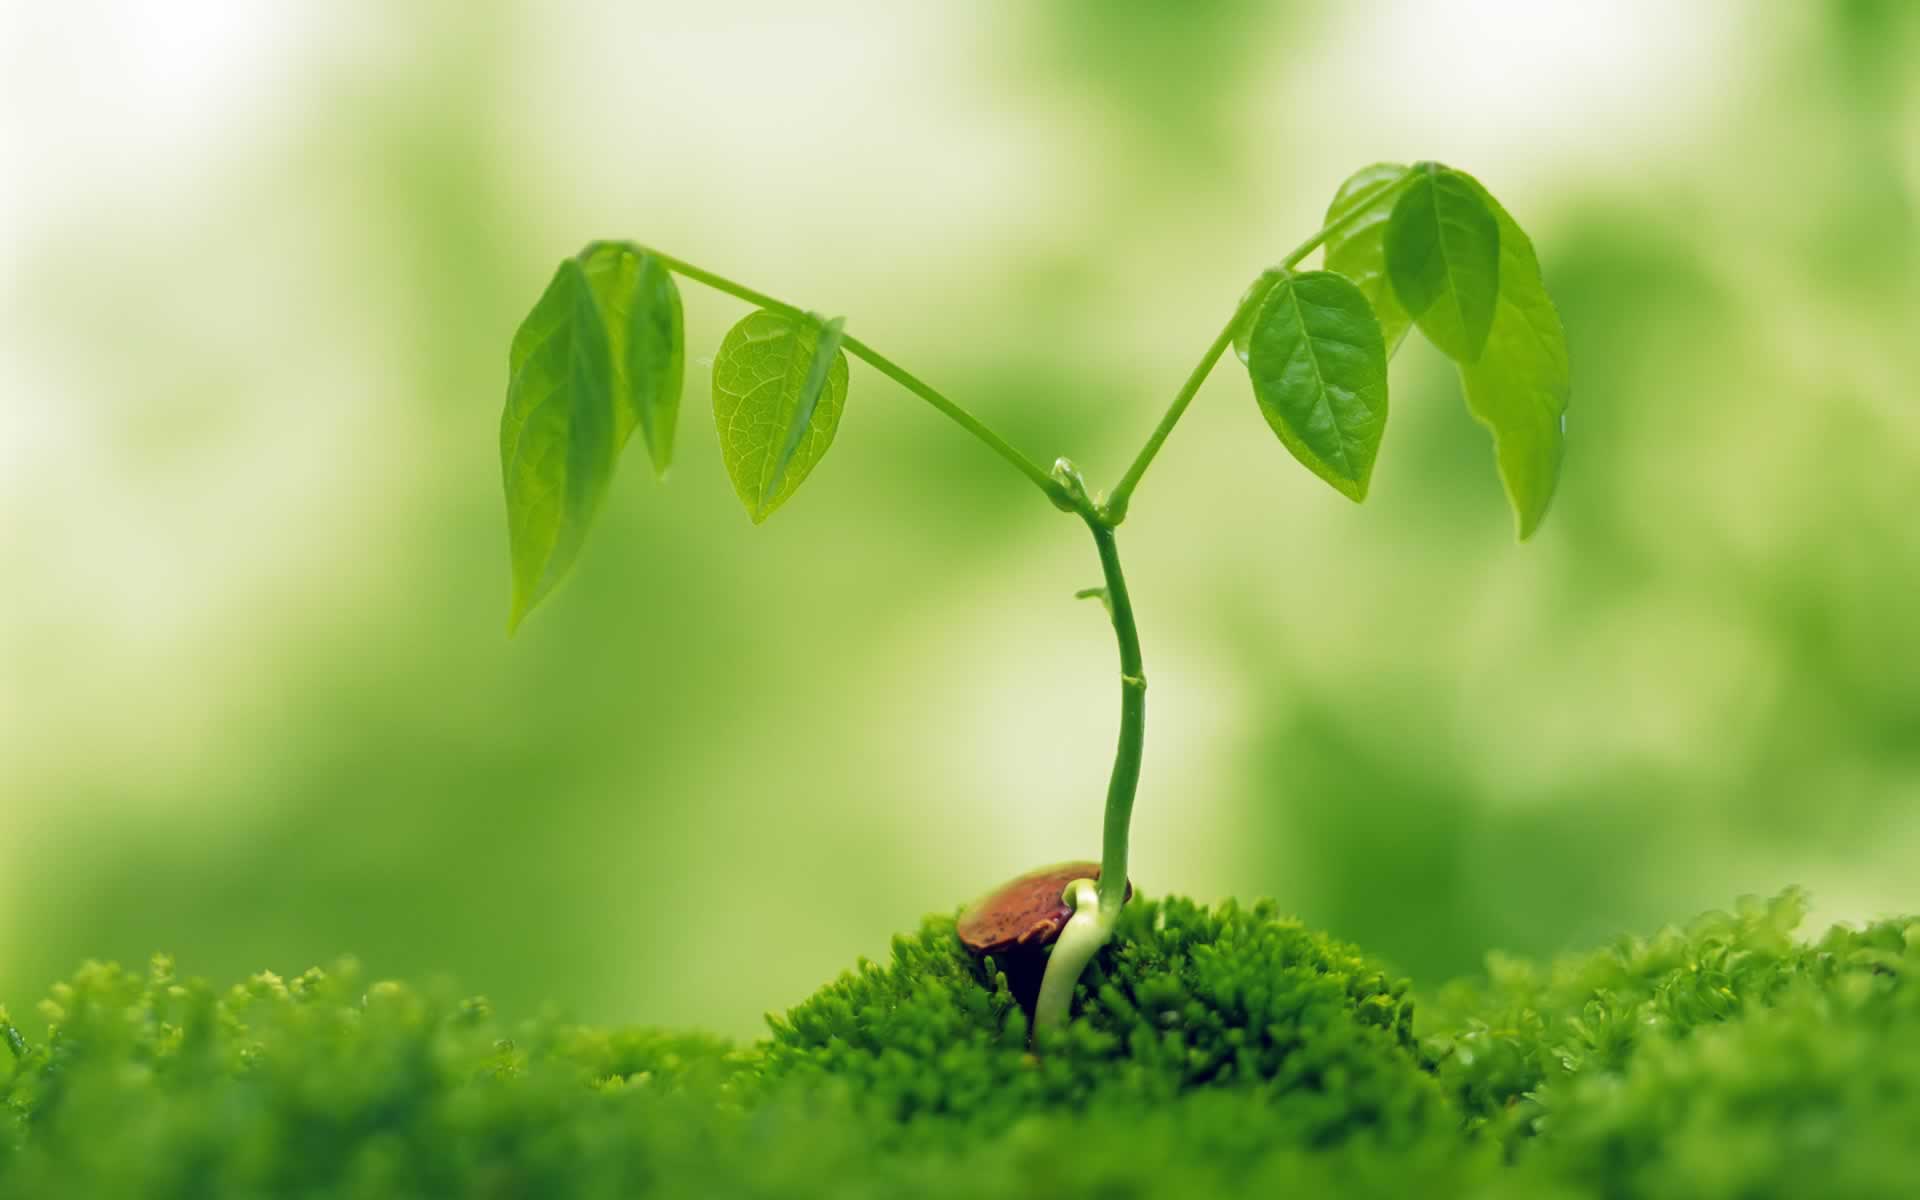 Extra Wallpapers - Small green plant